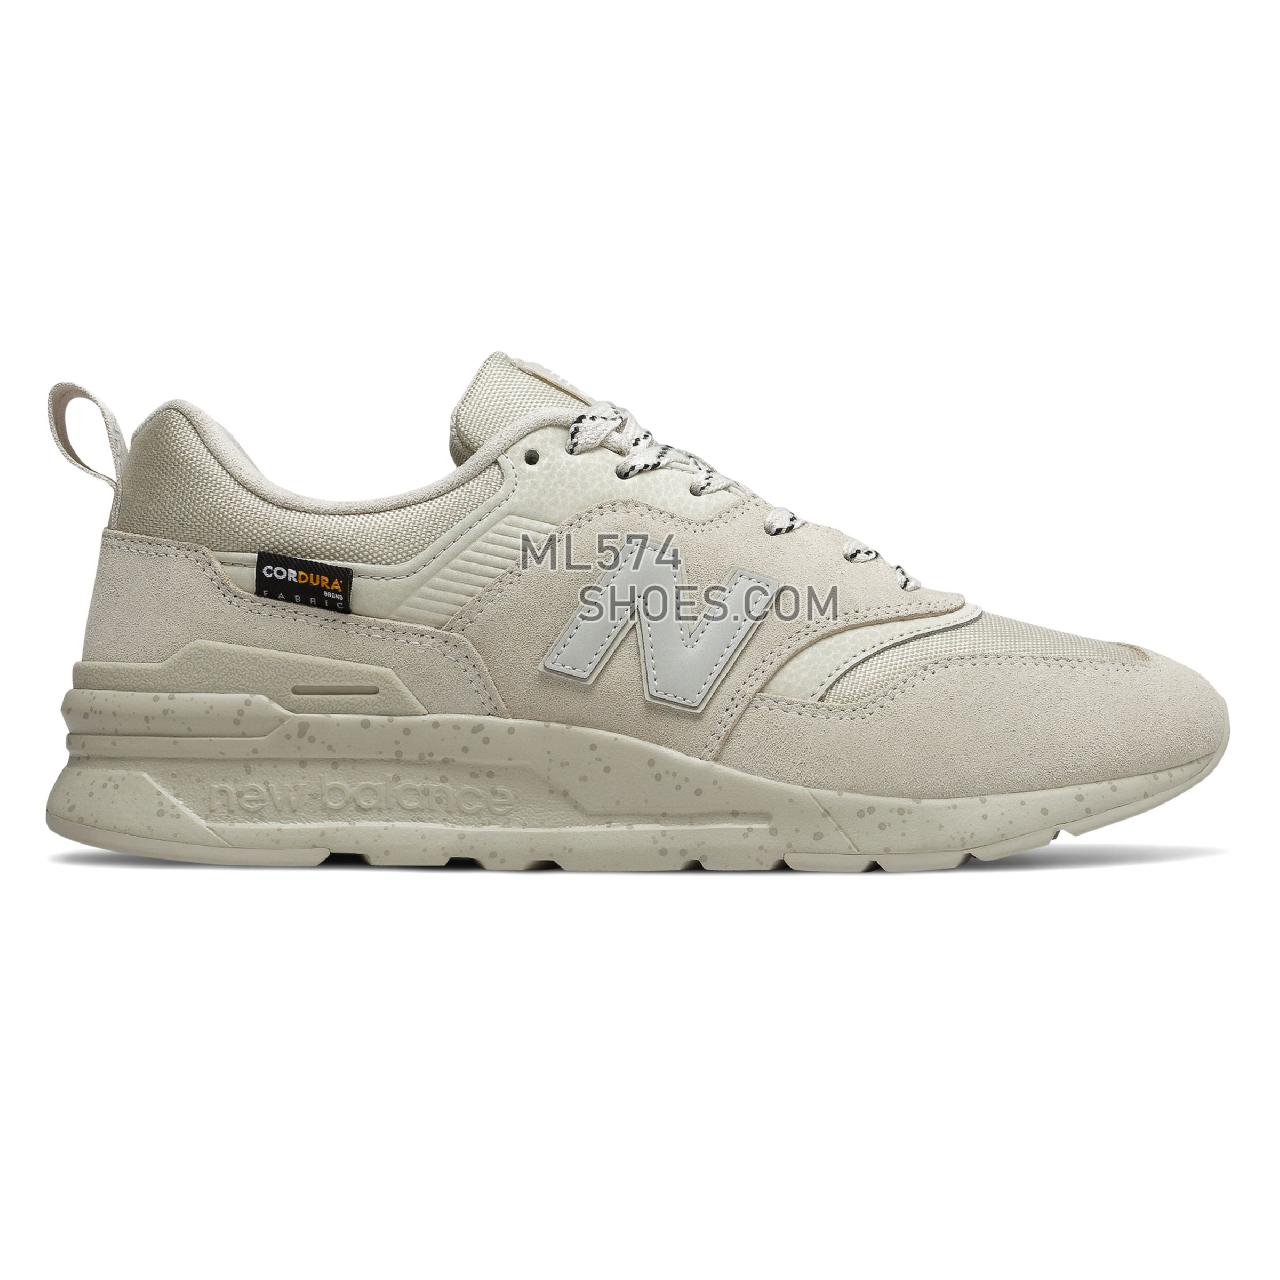 New Balance 997H - Men's 997H Classic CM997HV1-27439-M - Oyster with Off White - CM997HCZ